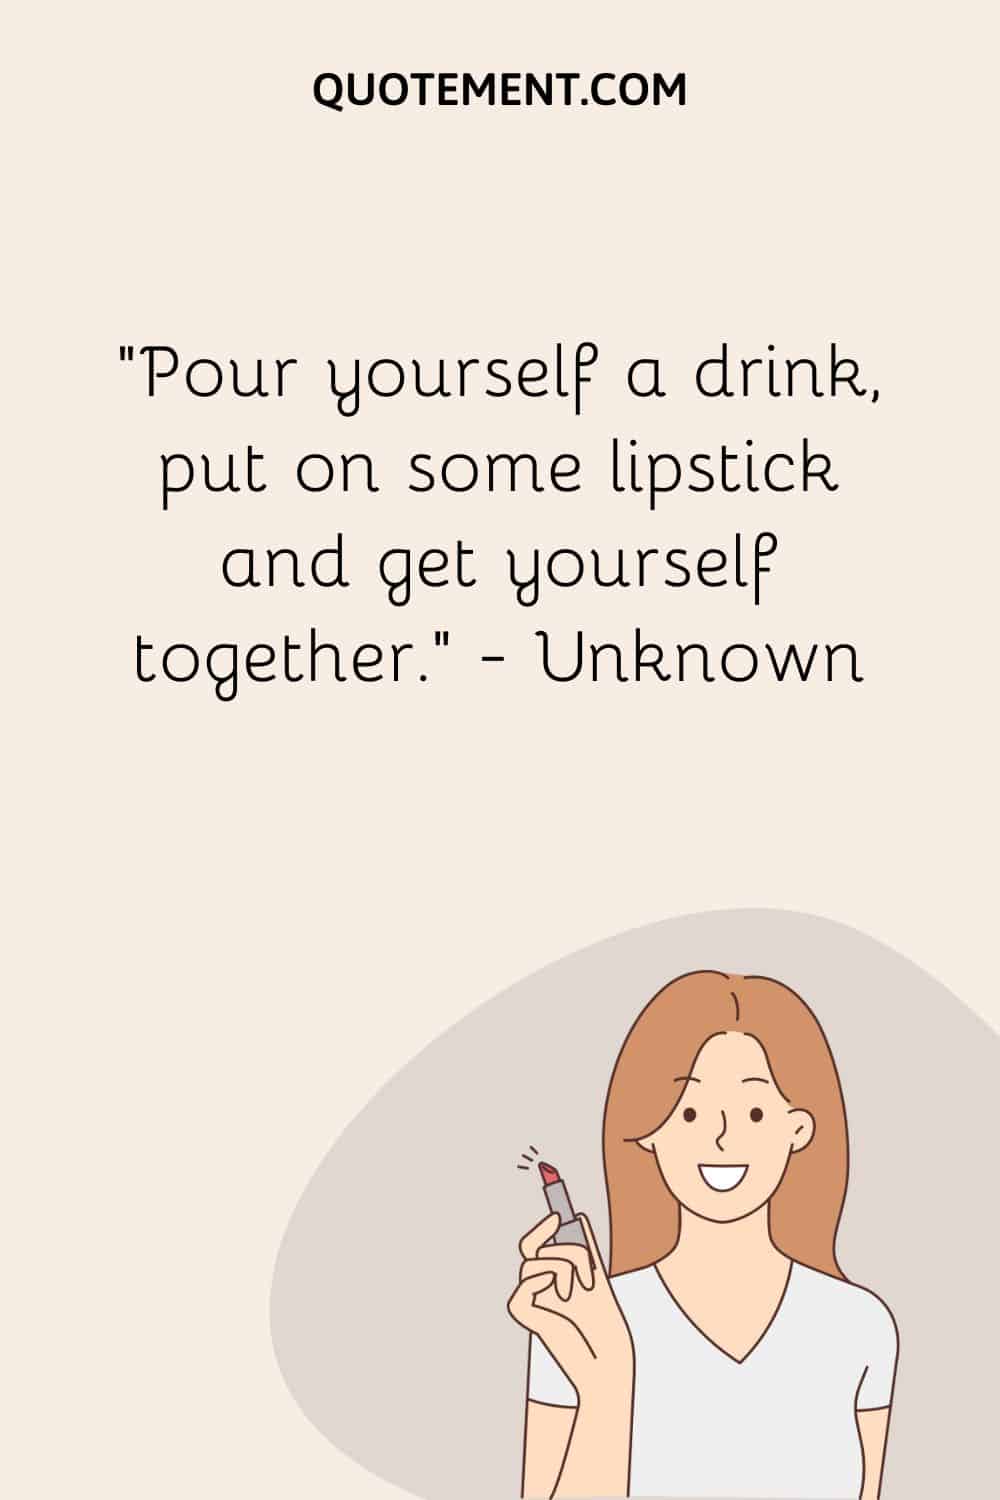 Pour yourself a drink, put on some lipstick and get yourself together.